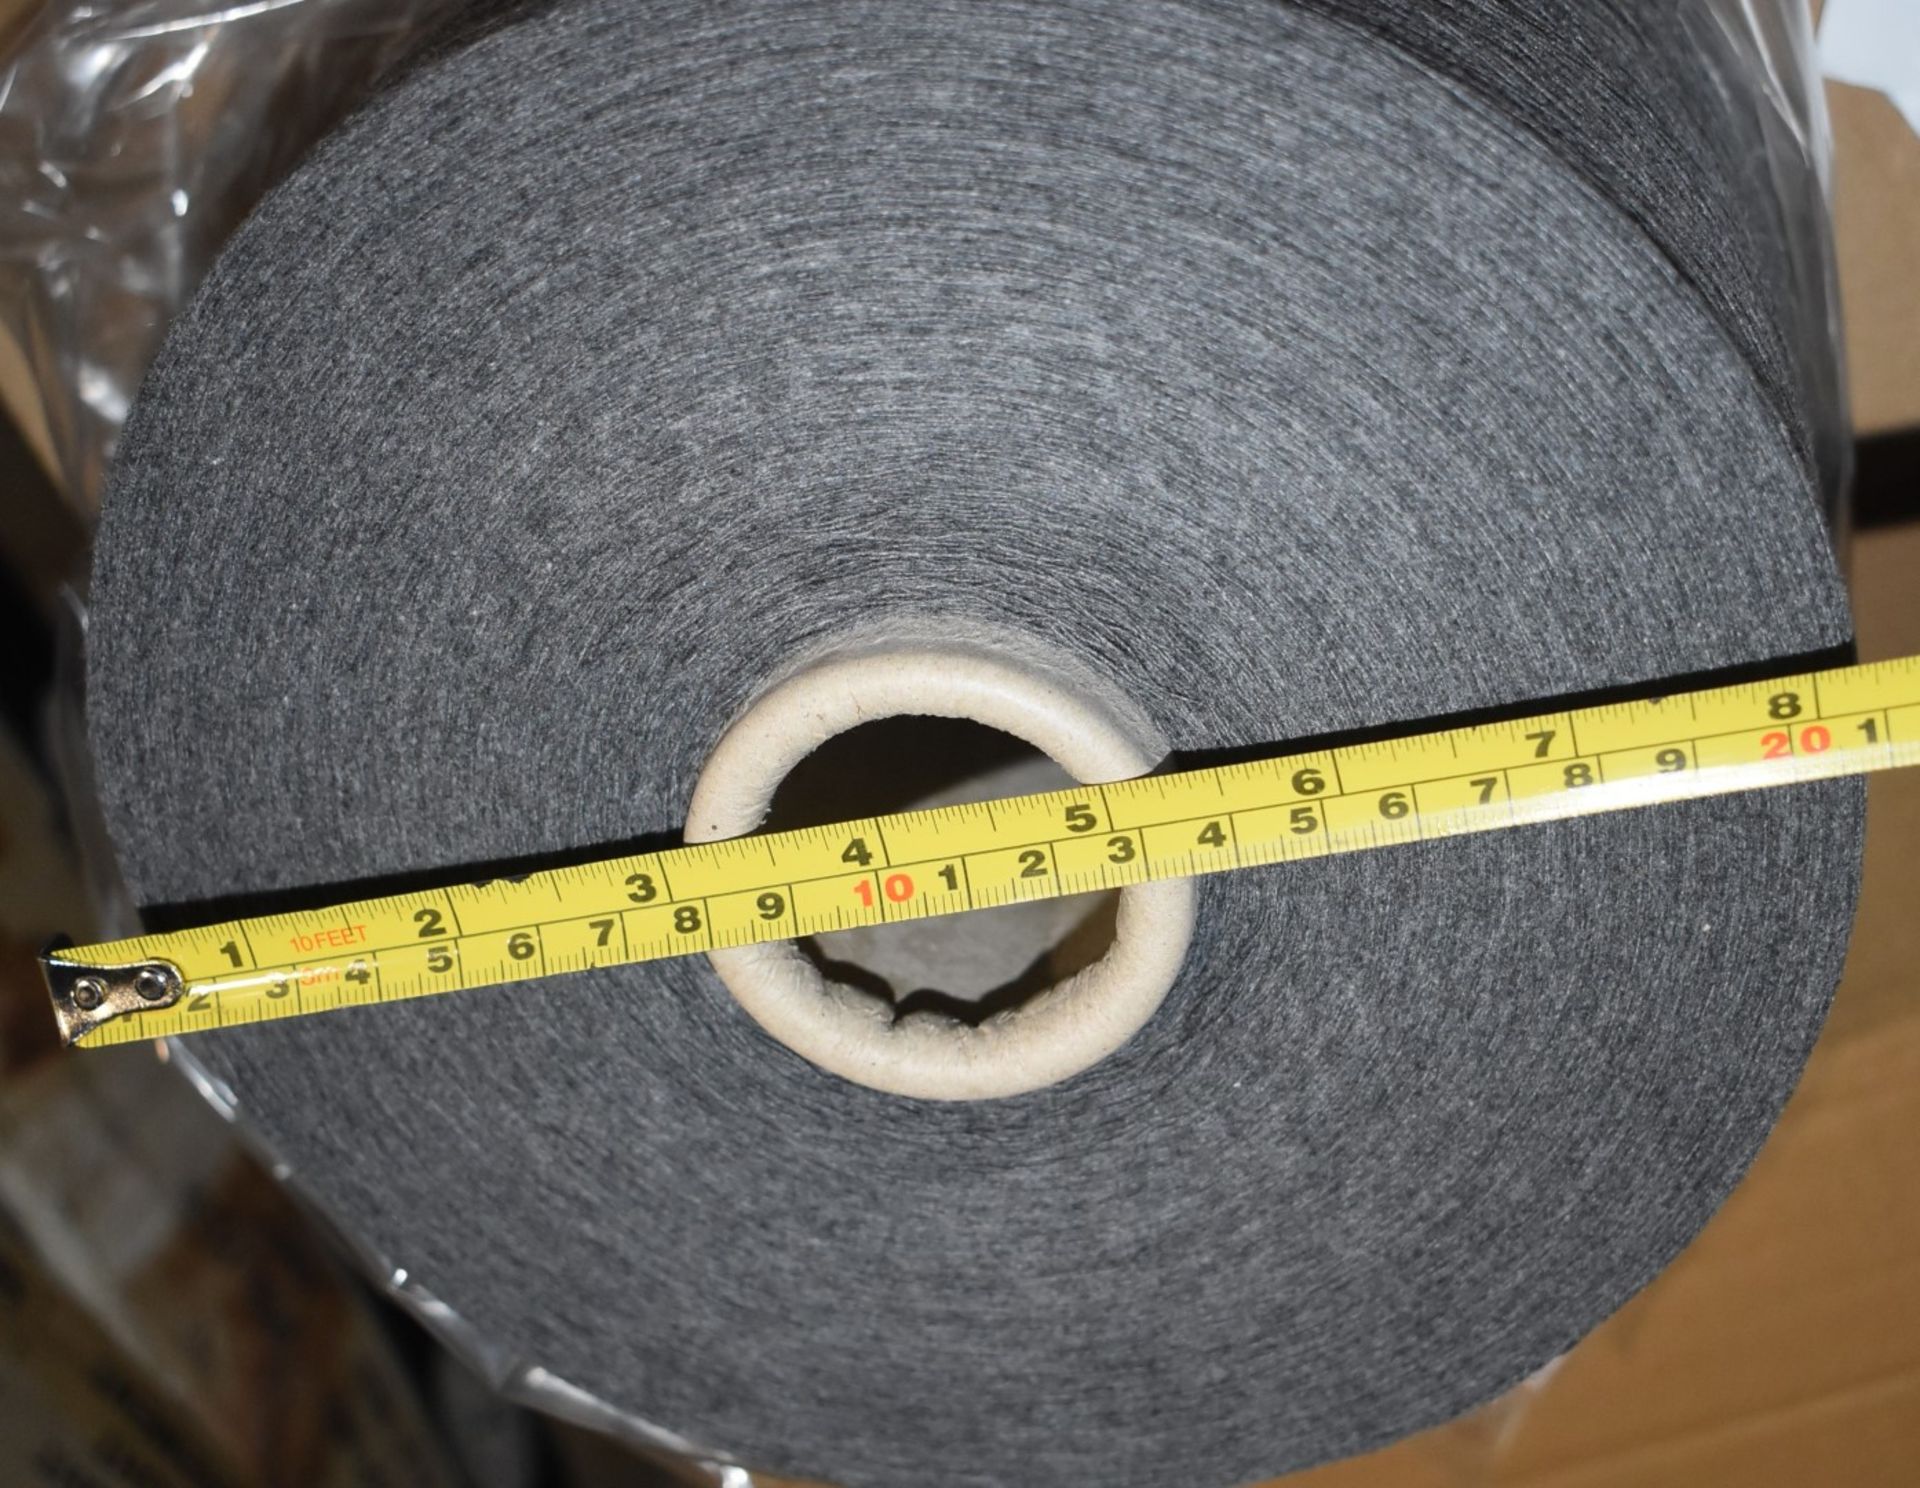 36 x Cones of 1/13 MicroCotton Knitting Yarn - Mid Grey - Approx Weight: 2,500g - New Stock ABL Yarn - Image 11 of 12